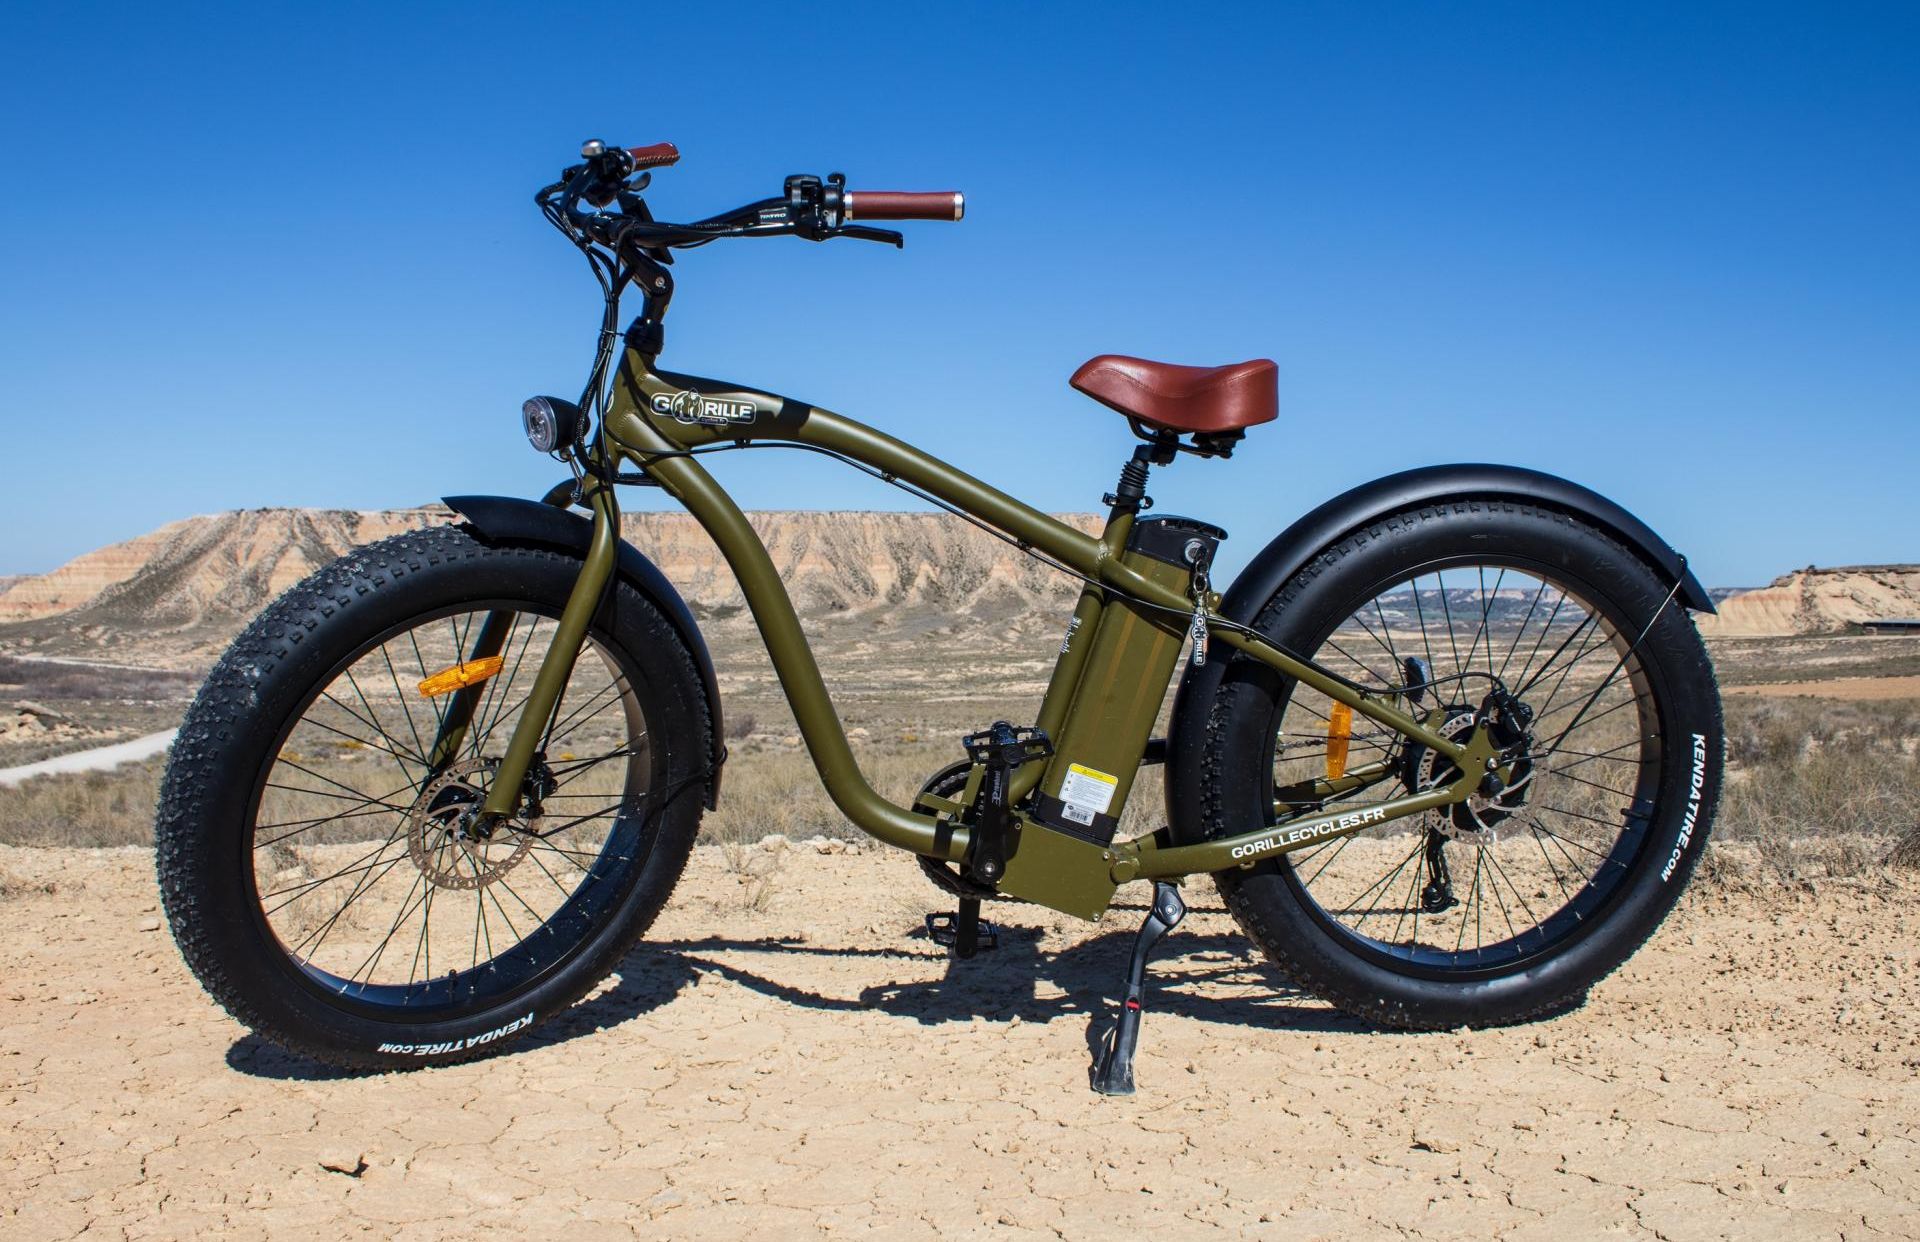 Gorille Tricycle – Gorille Cycles